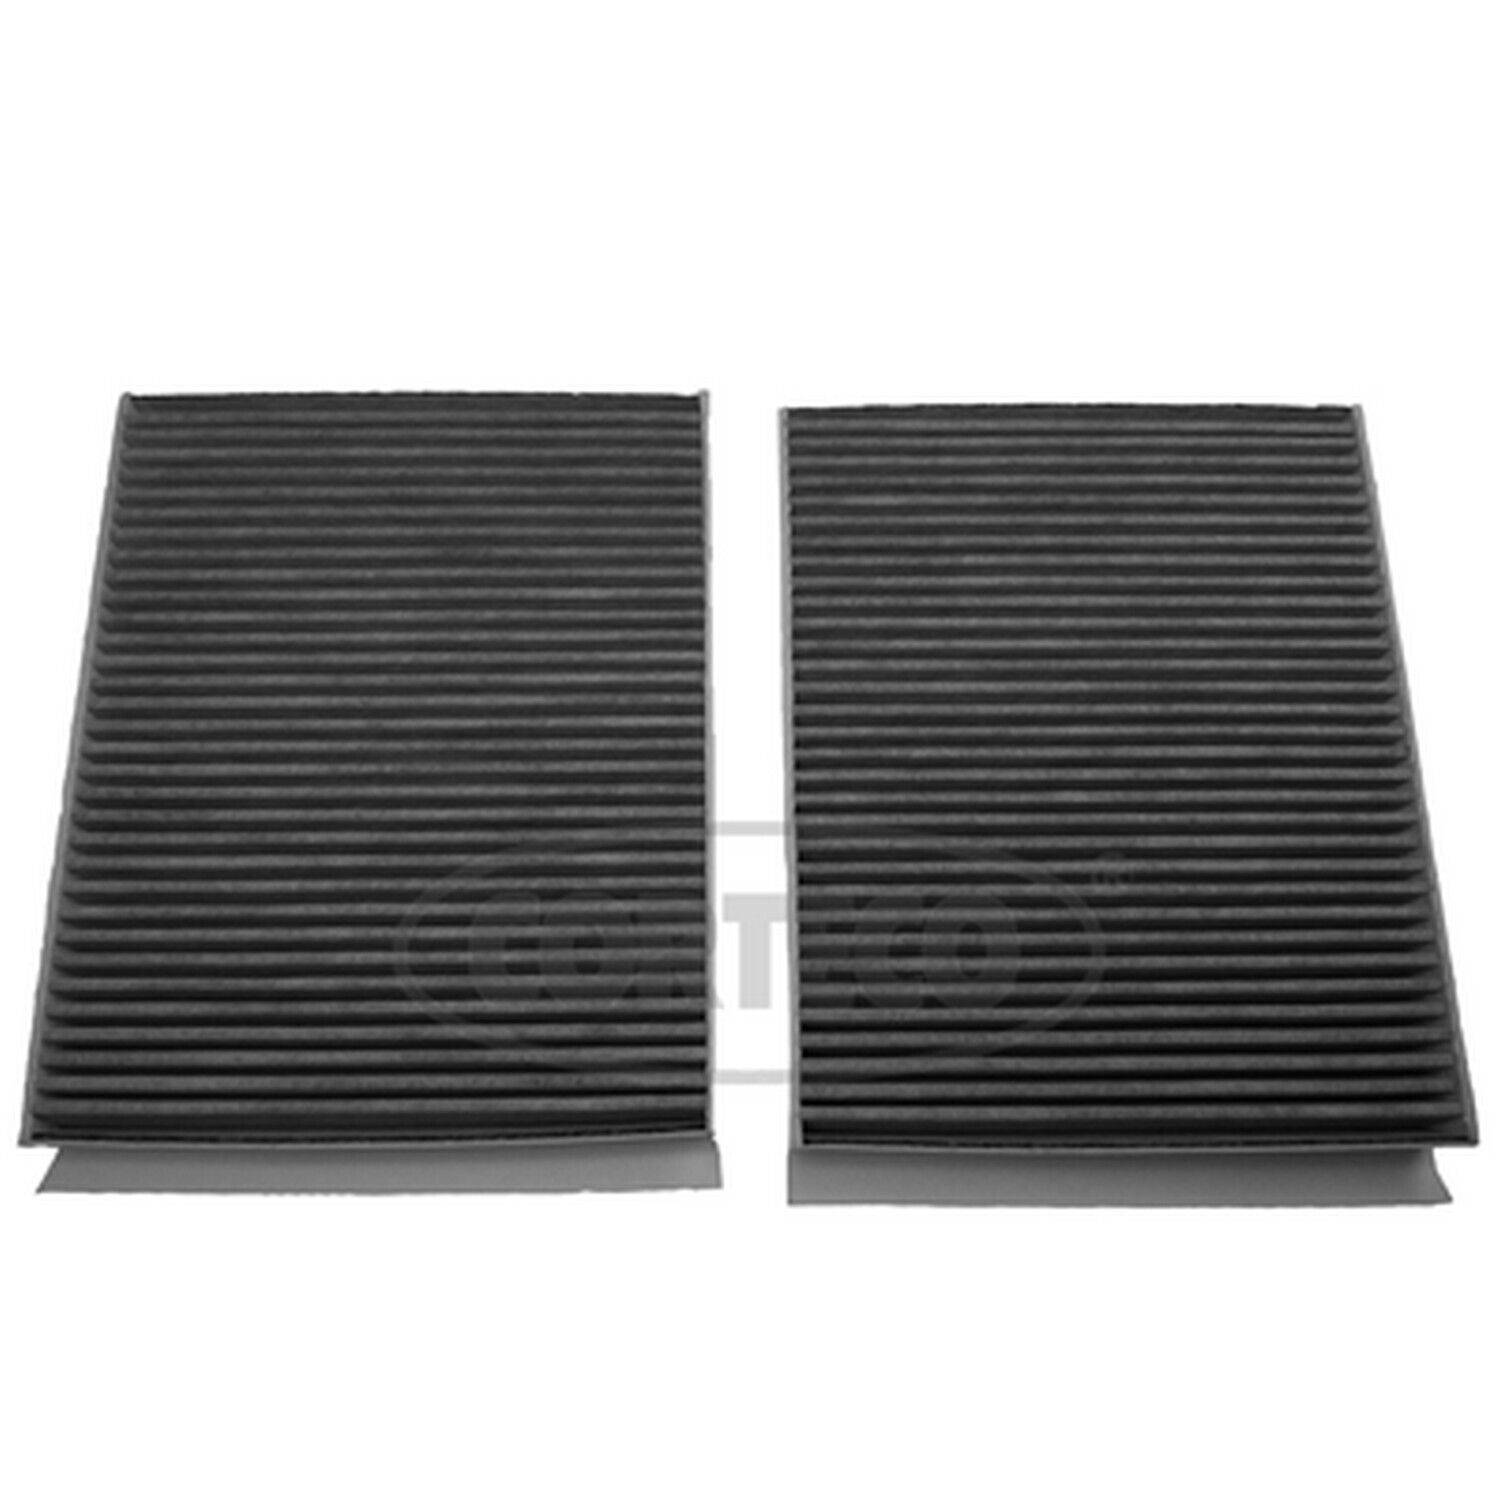 Corteco Cabin Air Filter for BMW 80001211